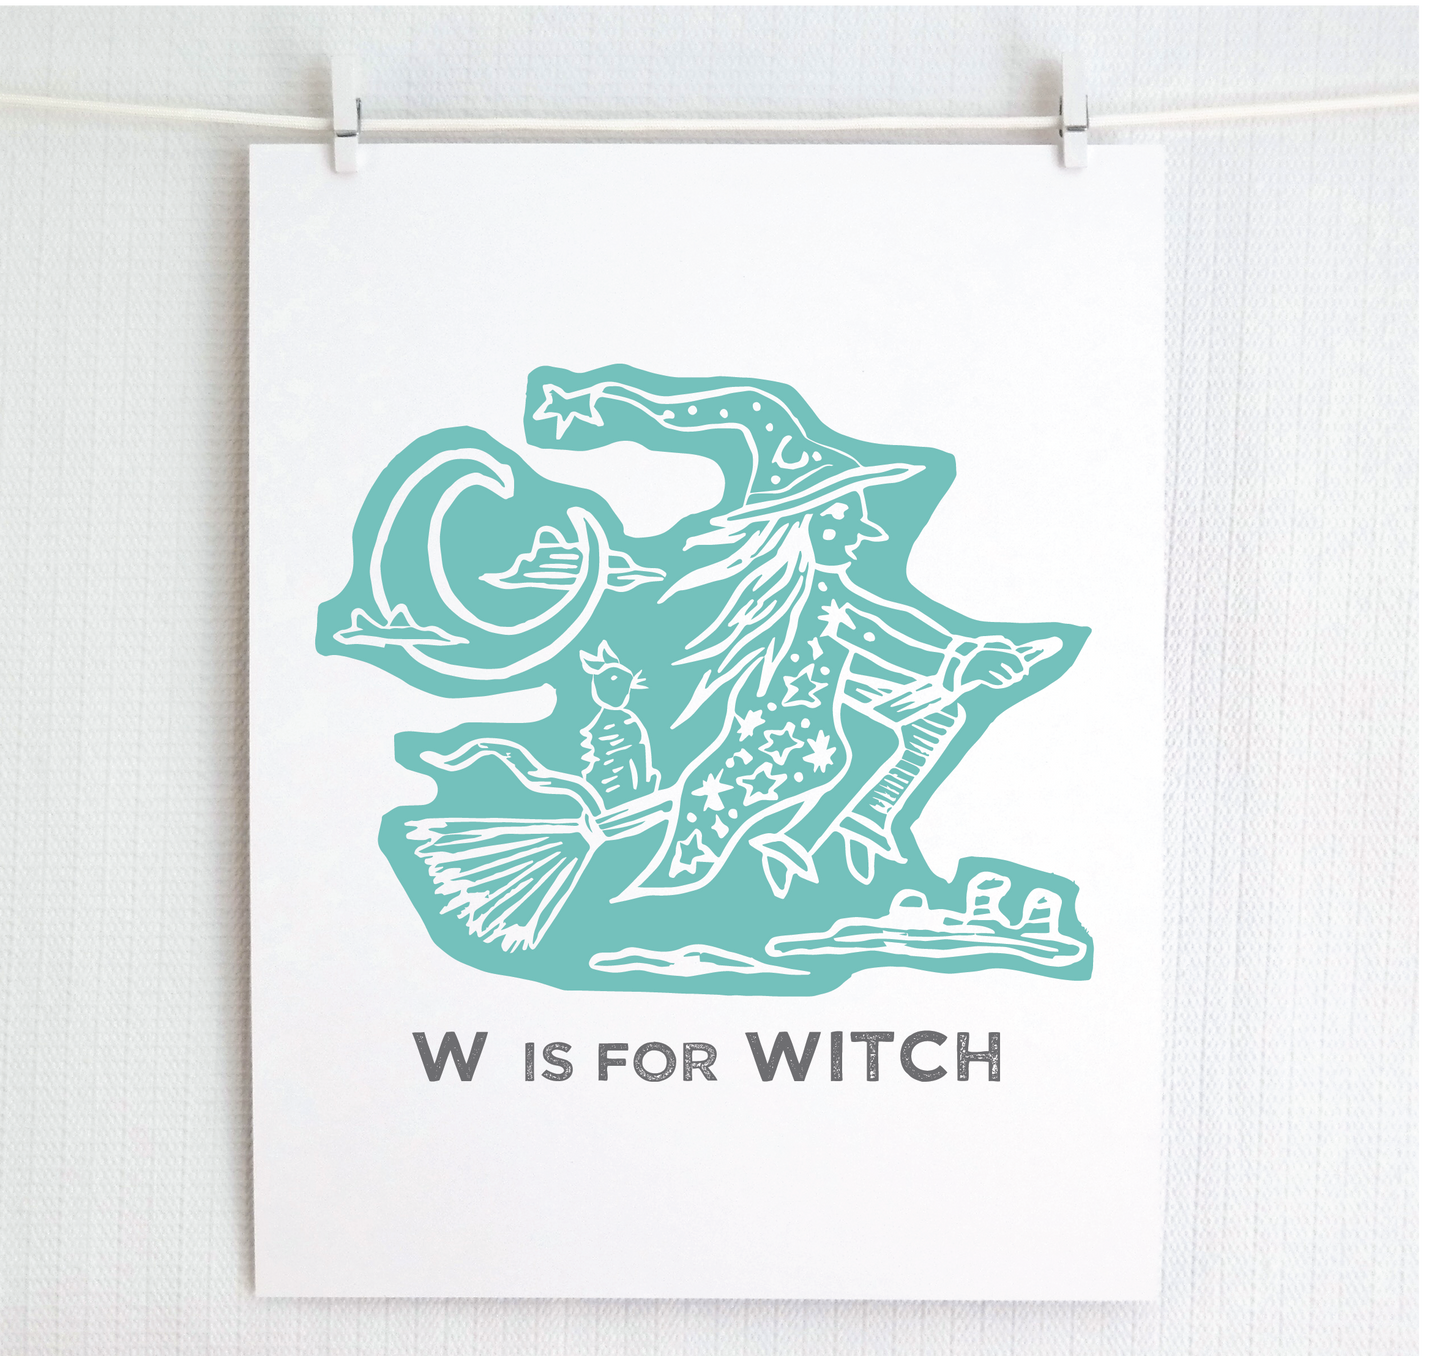 W is for Witch